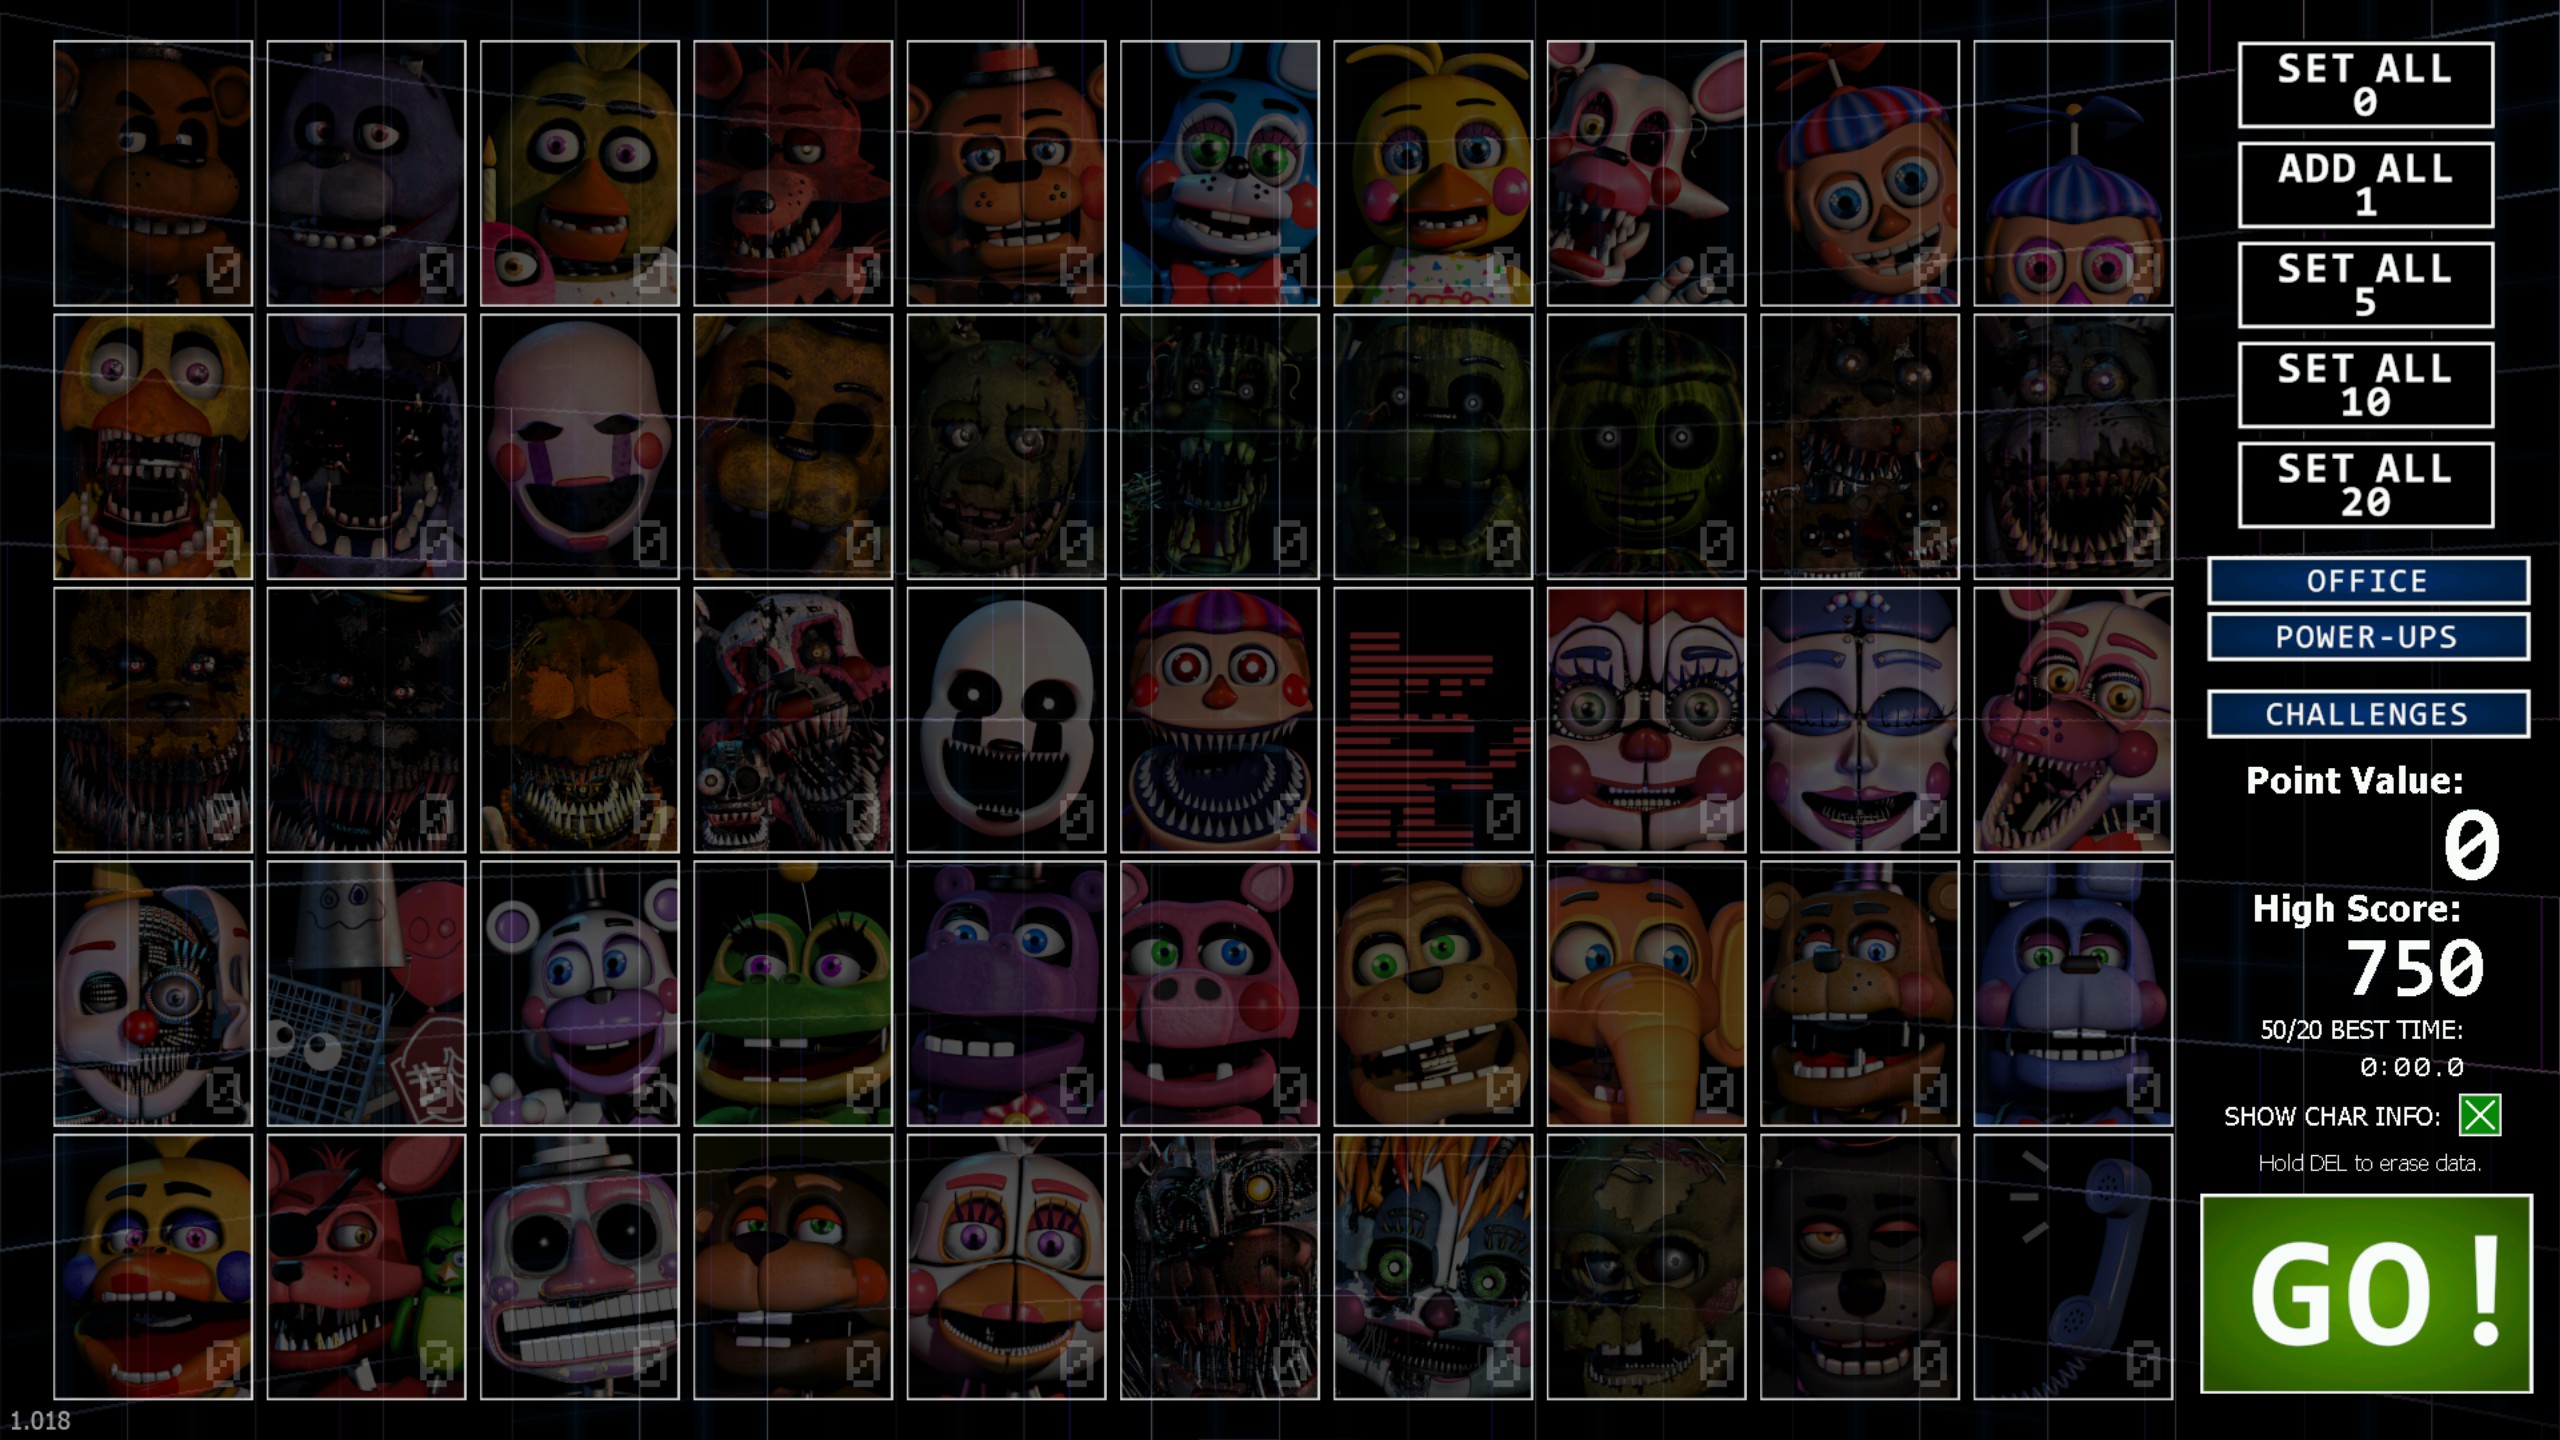 Ultimate Custom Night Will Keep Five Nights At Freddy's Fans On Their Toes